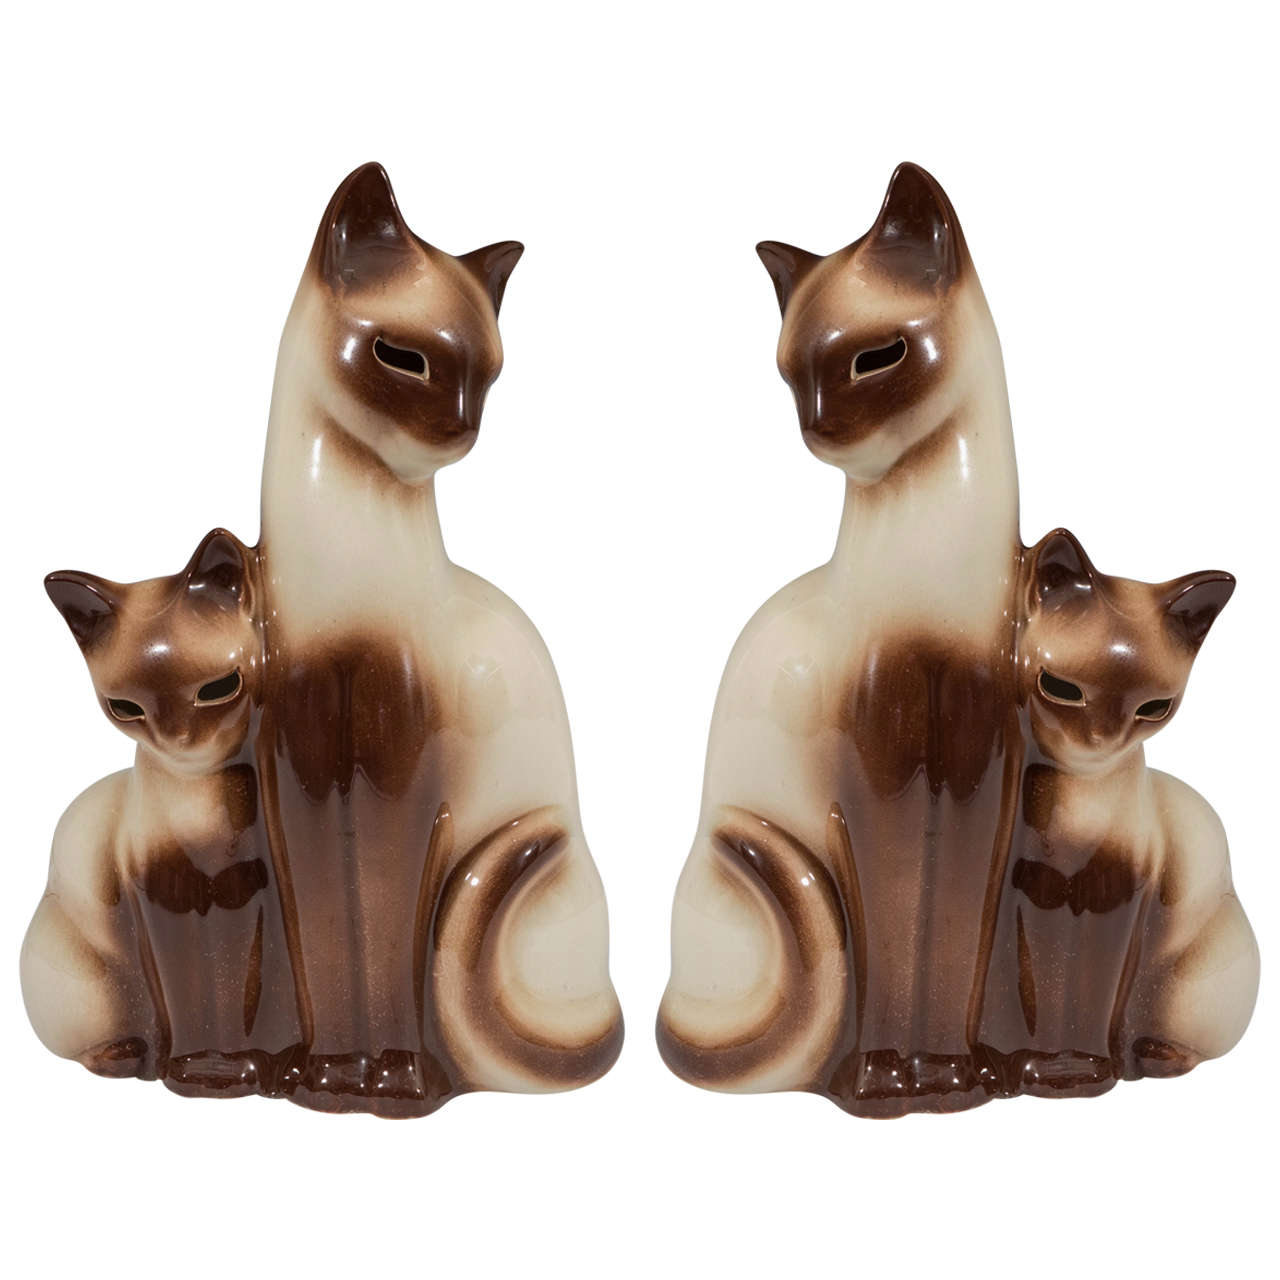 A Midcentury Pair of Ceramic Siamese Cat and Kitten TV Lamps by Howard Kron